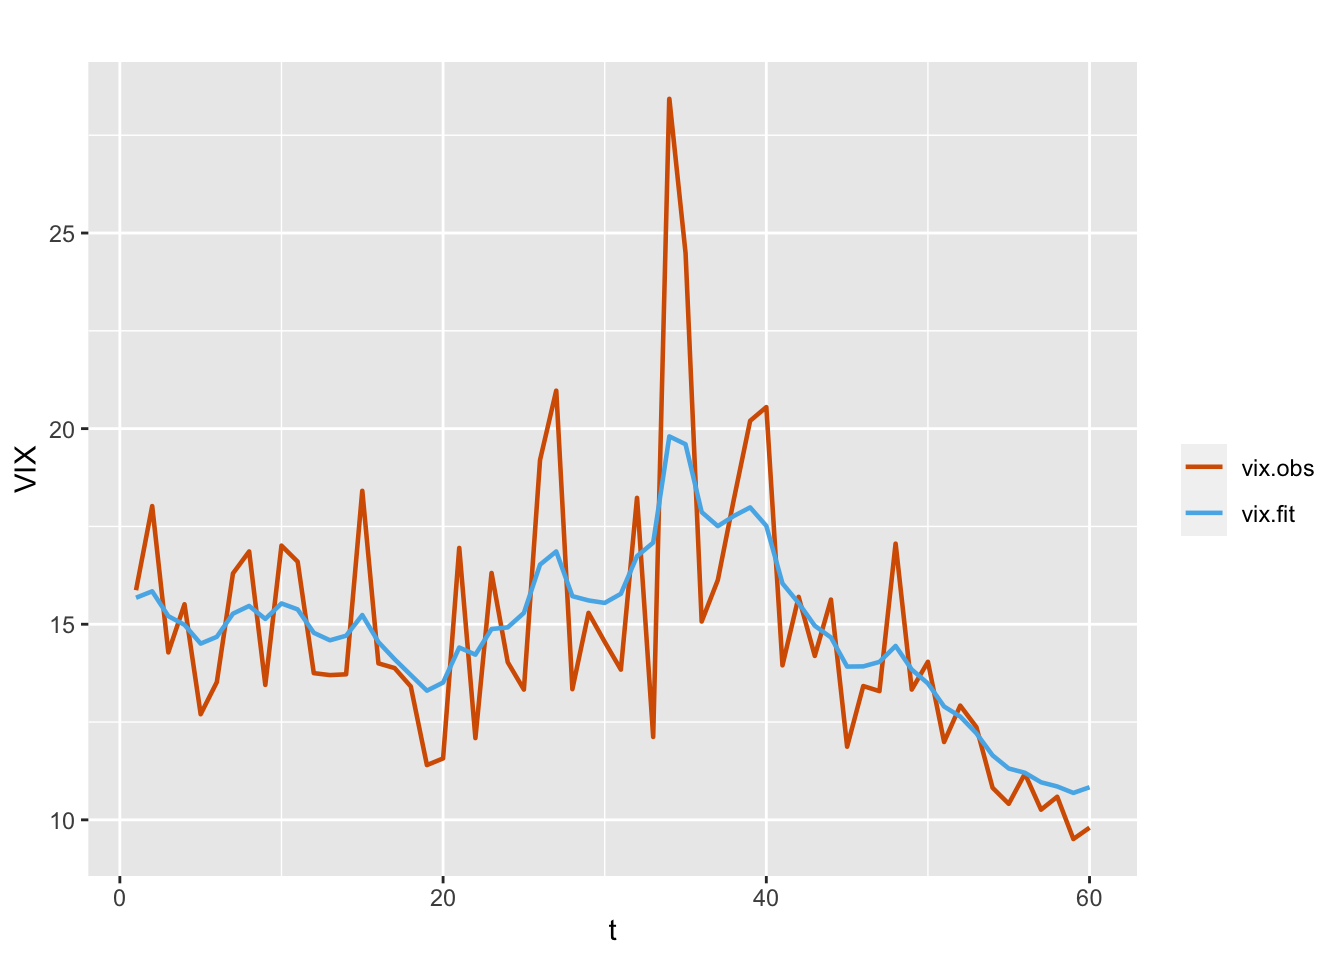 Observed (red) and fitted (blue) VIX values from the model without regressors (Model G1).